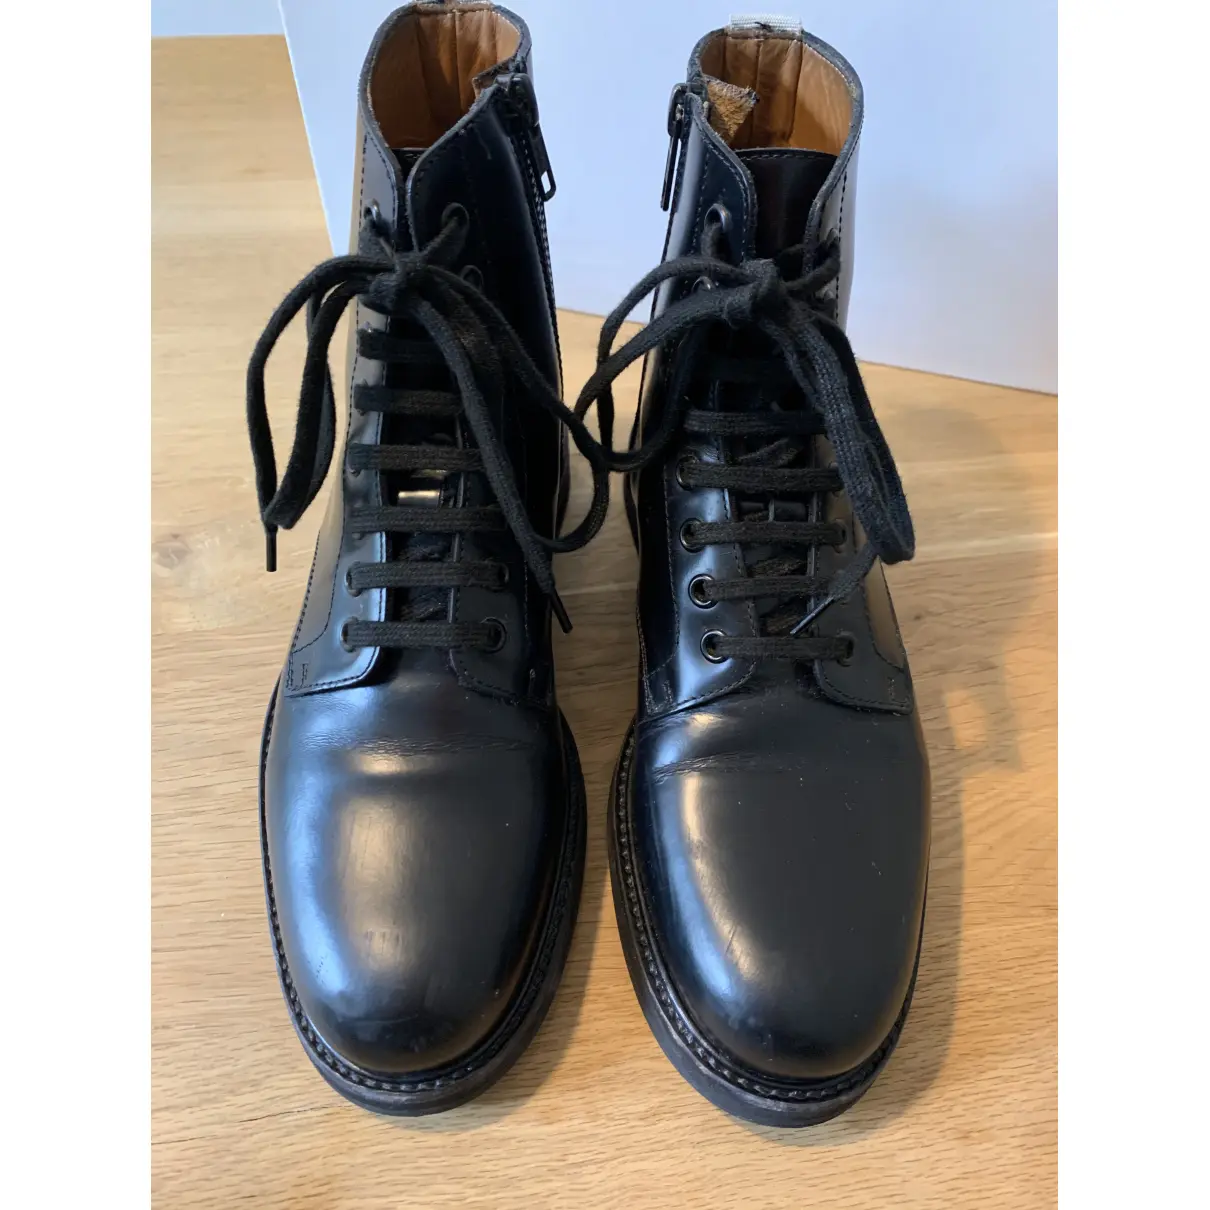 Buy Common Projects Leather lace up boots online